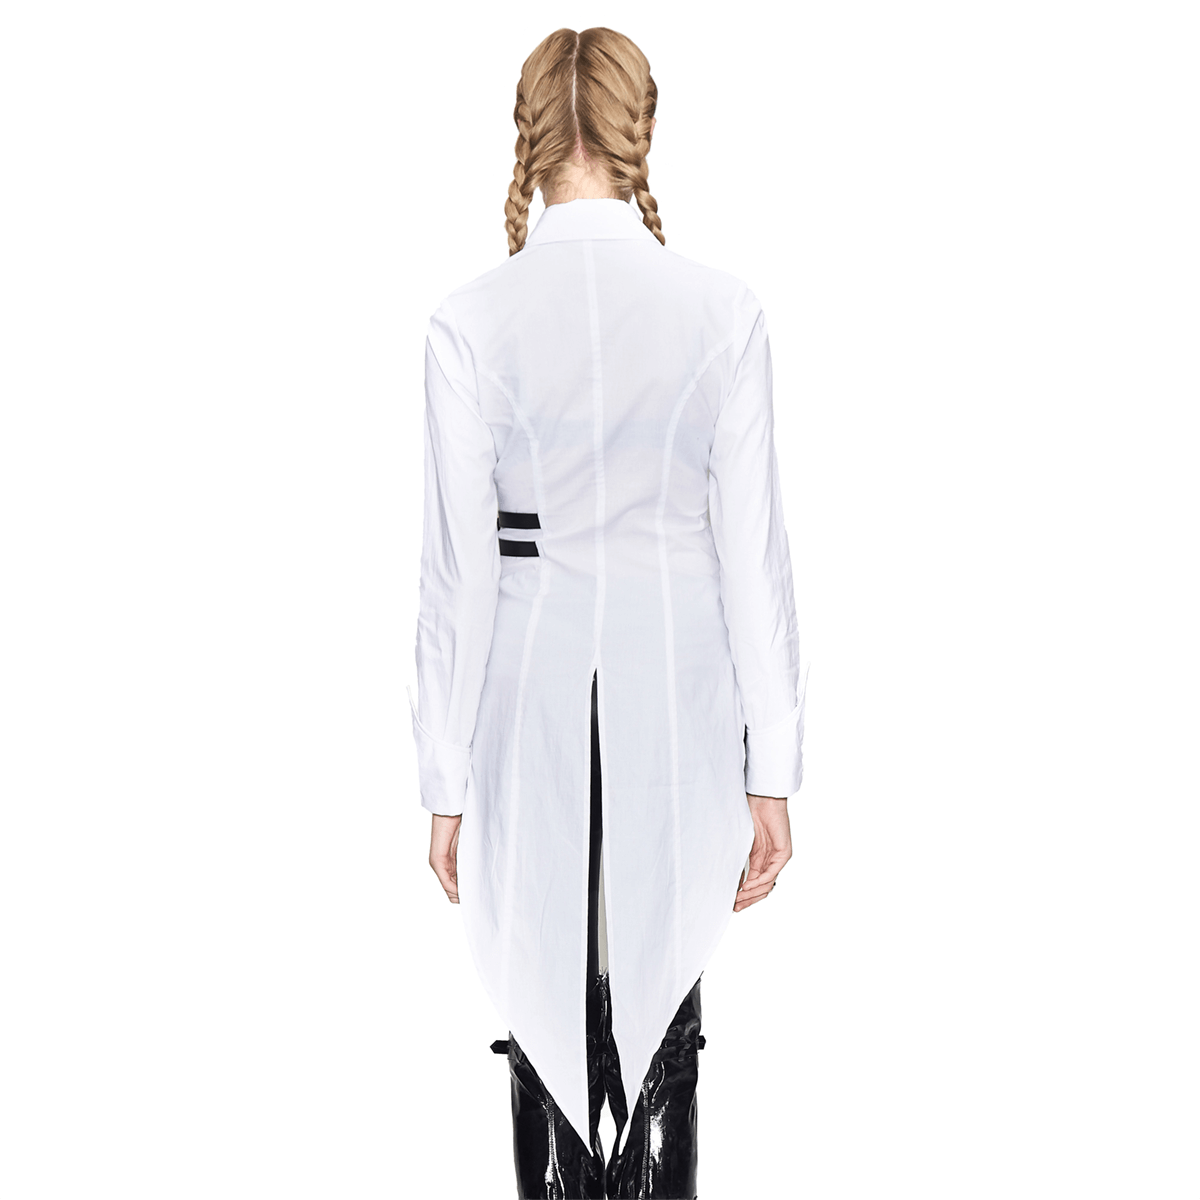 Women's White Gothic Irregular Blouse / Ladies Long Shirt With Buckle Belt and Lace-up Accents - HARD'N'HEAVY